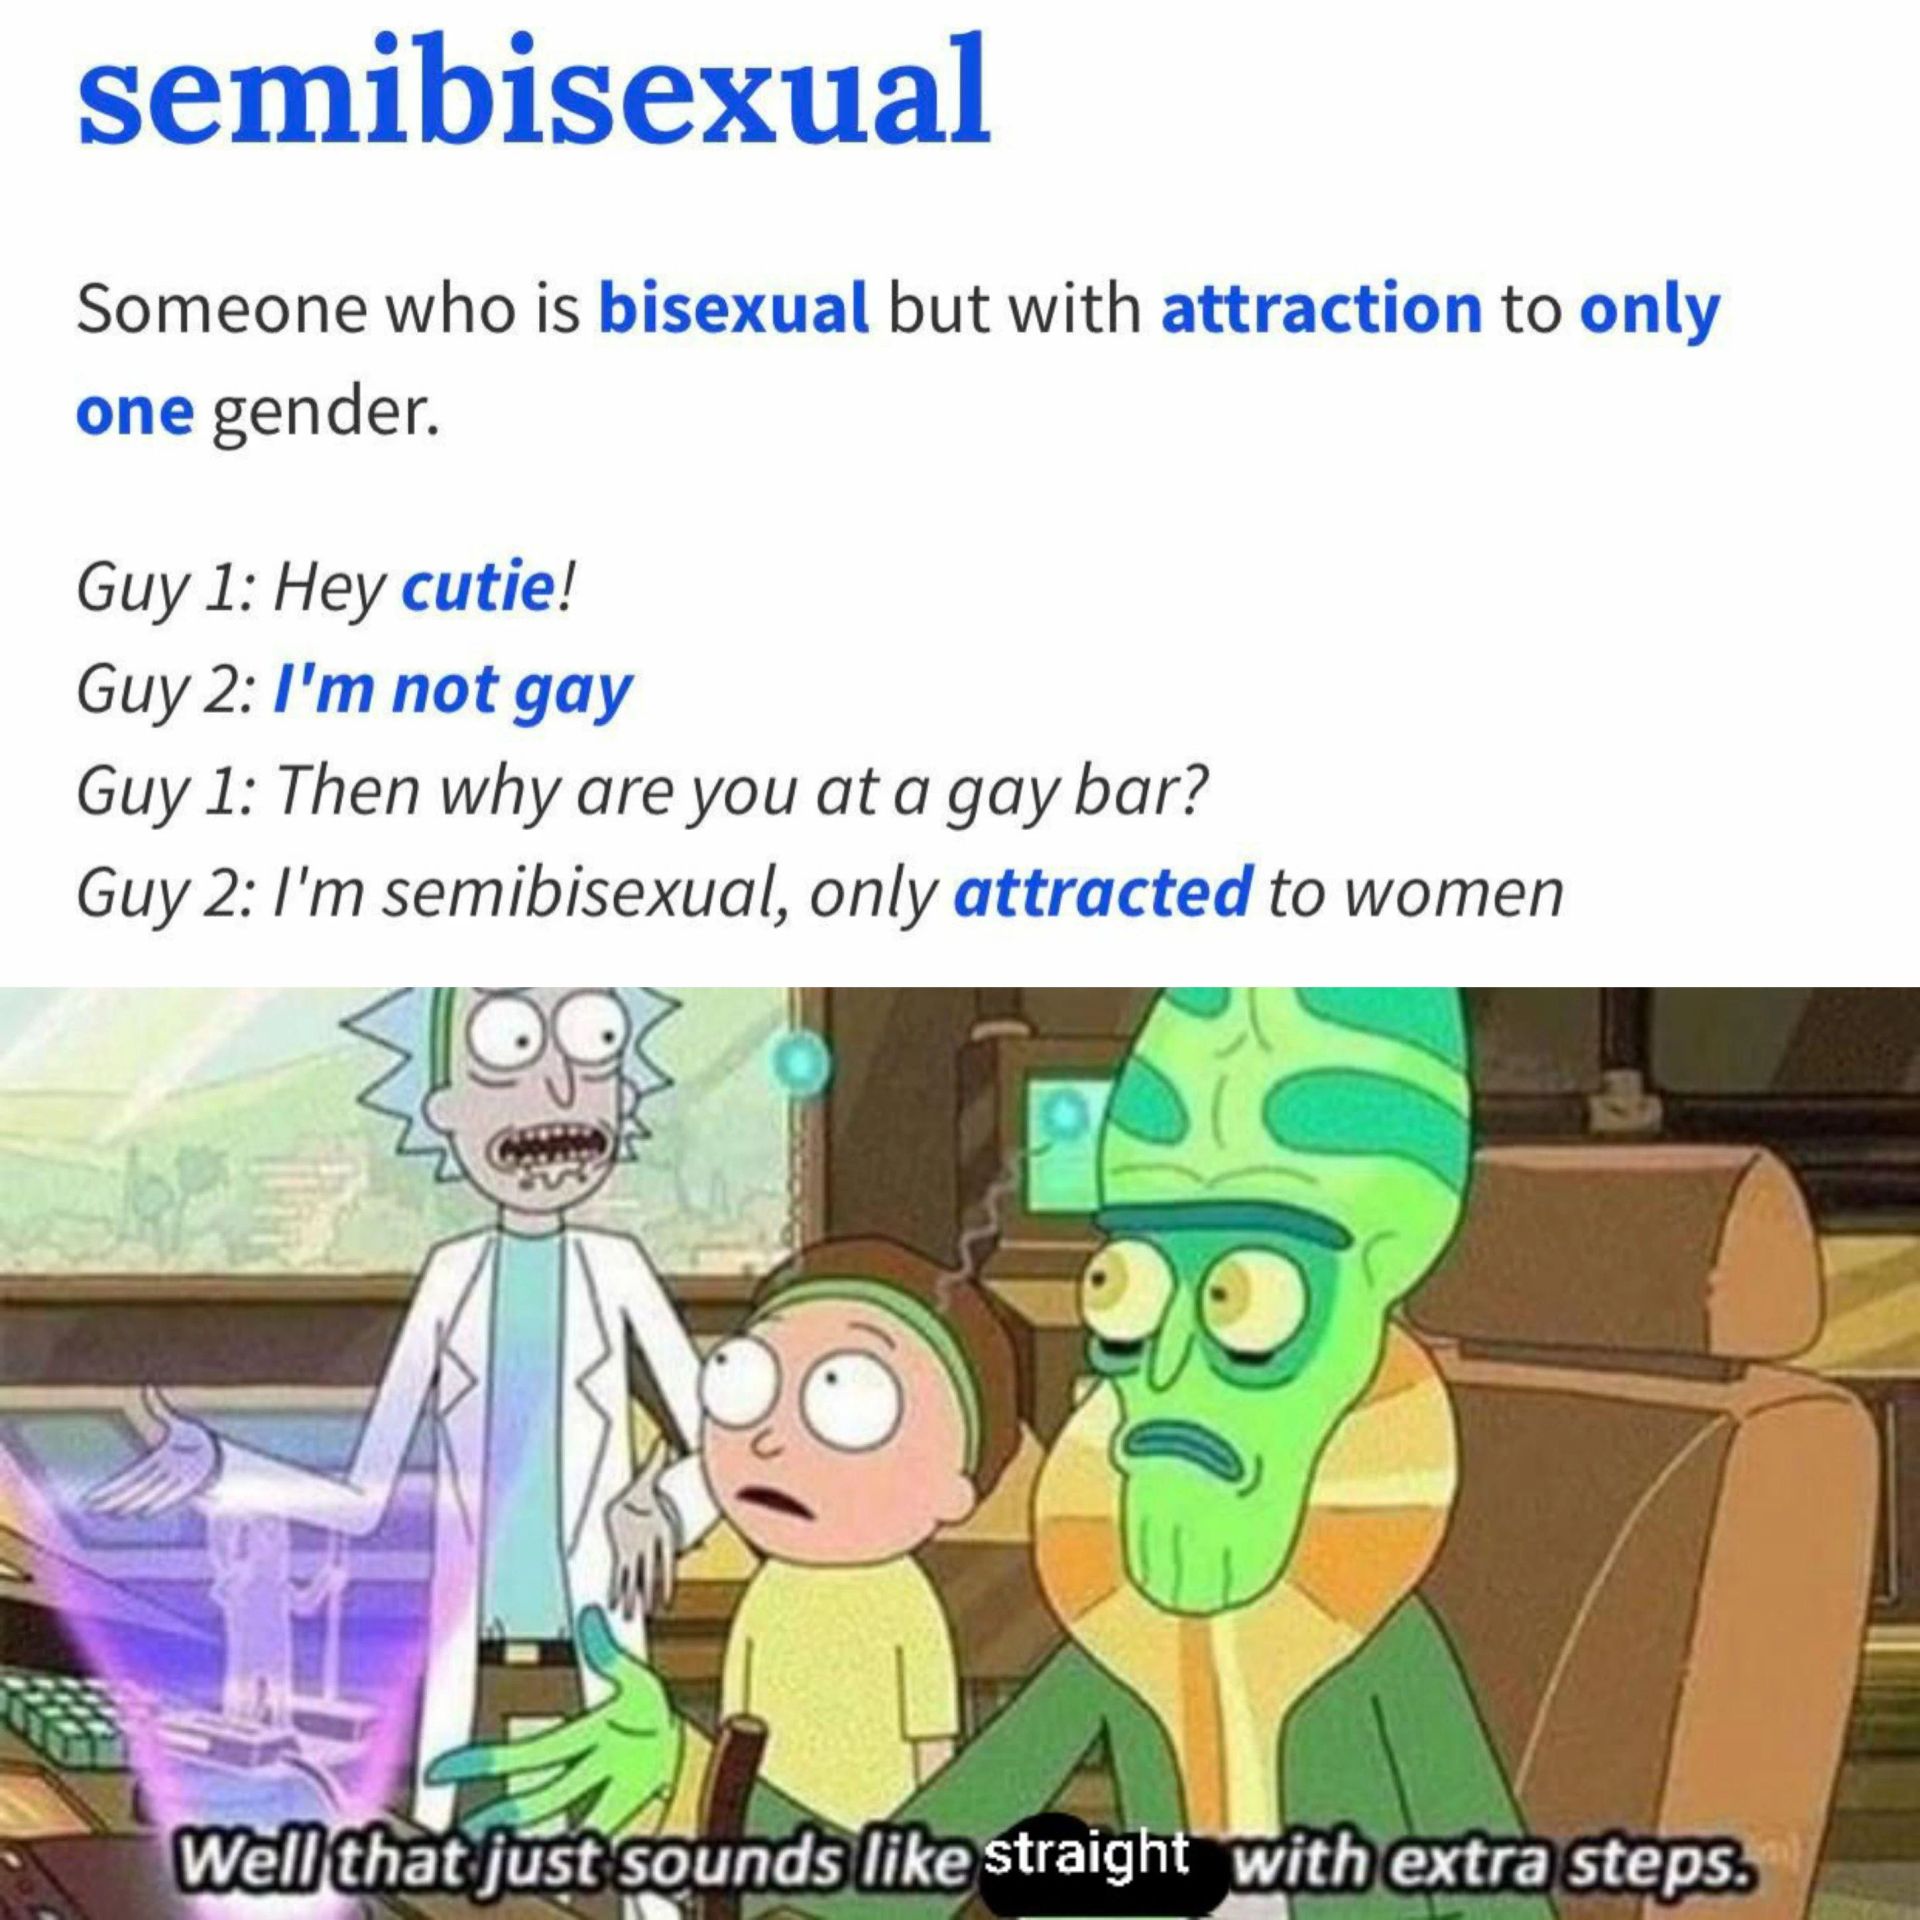 semibisexual
Someone who is bisexual but with attraction to only
one gender.
Guy 1: Hey cutie!
Guy 2: I'm not gay
Guy 1: Then why are you at a gay bar?
Guy 2: I'm semibisexual, only attracted to women
Well that just sounds like straight with extra steps.